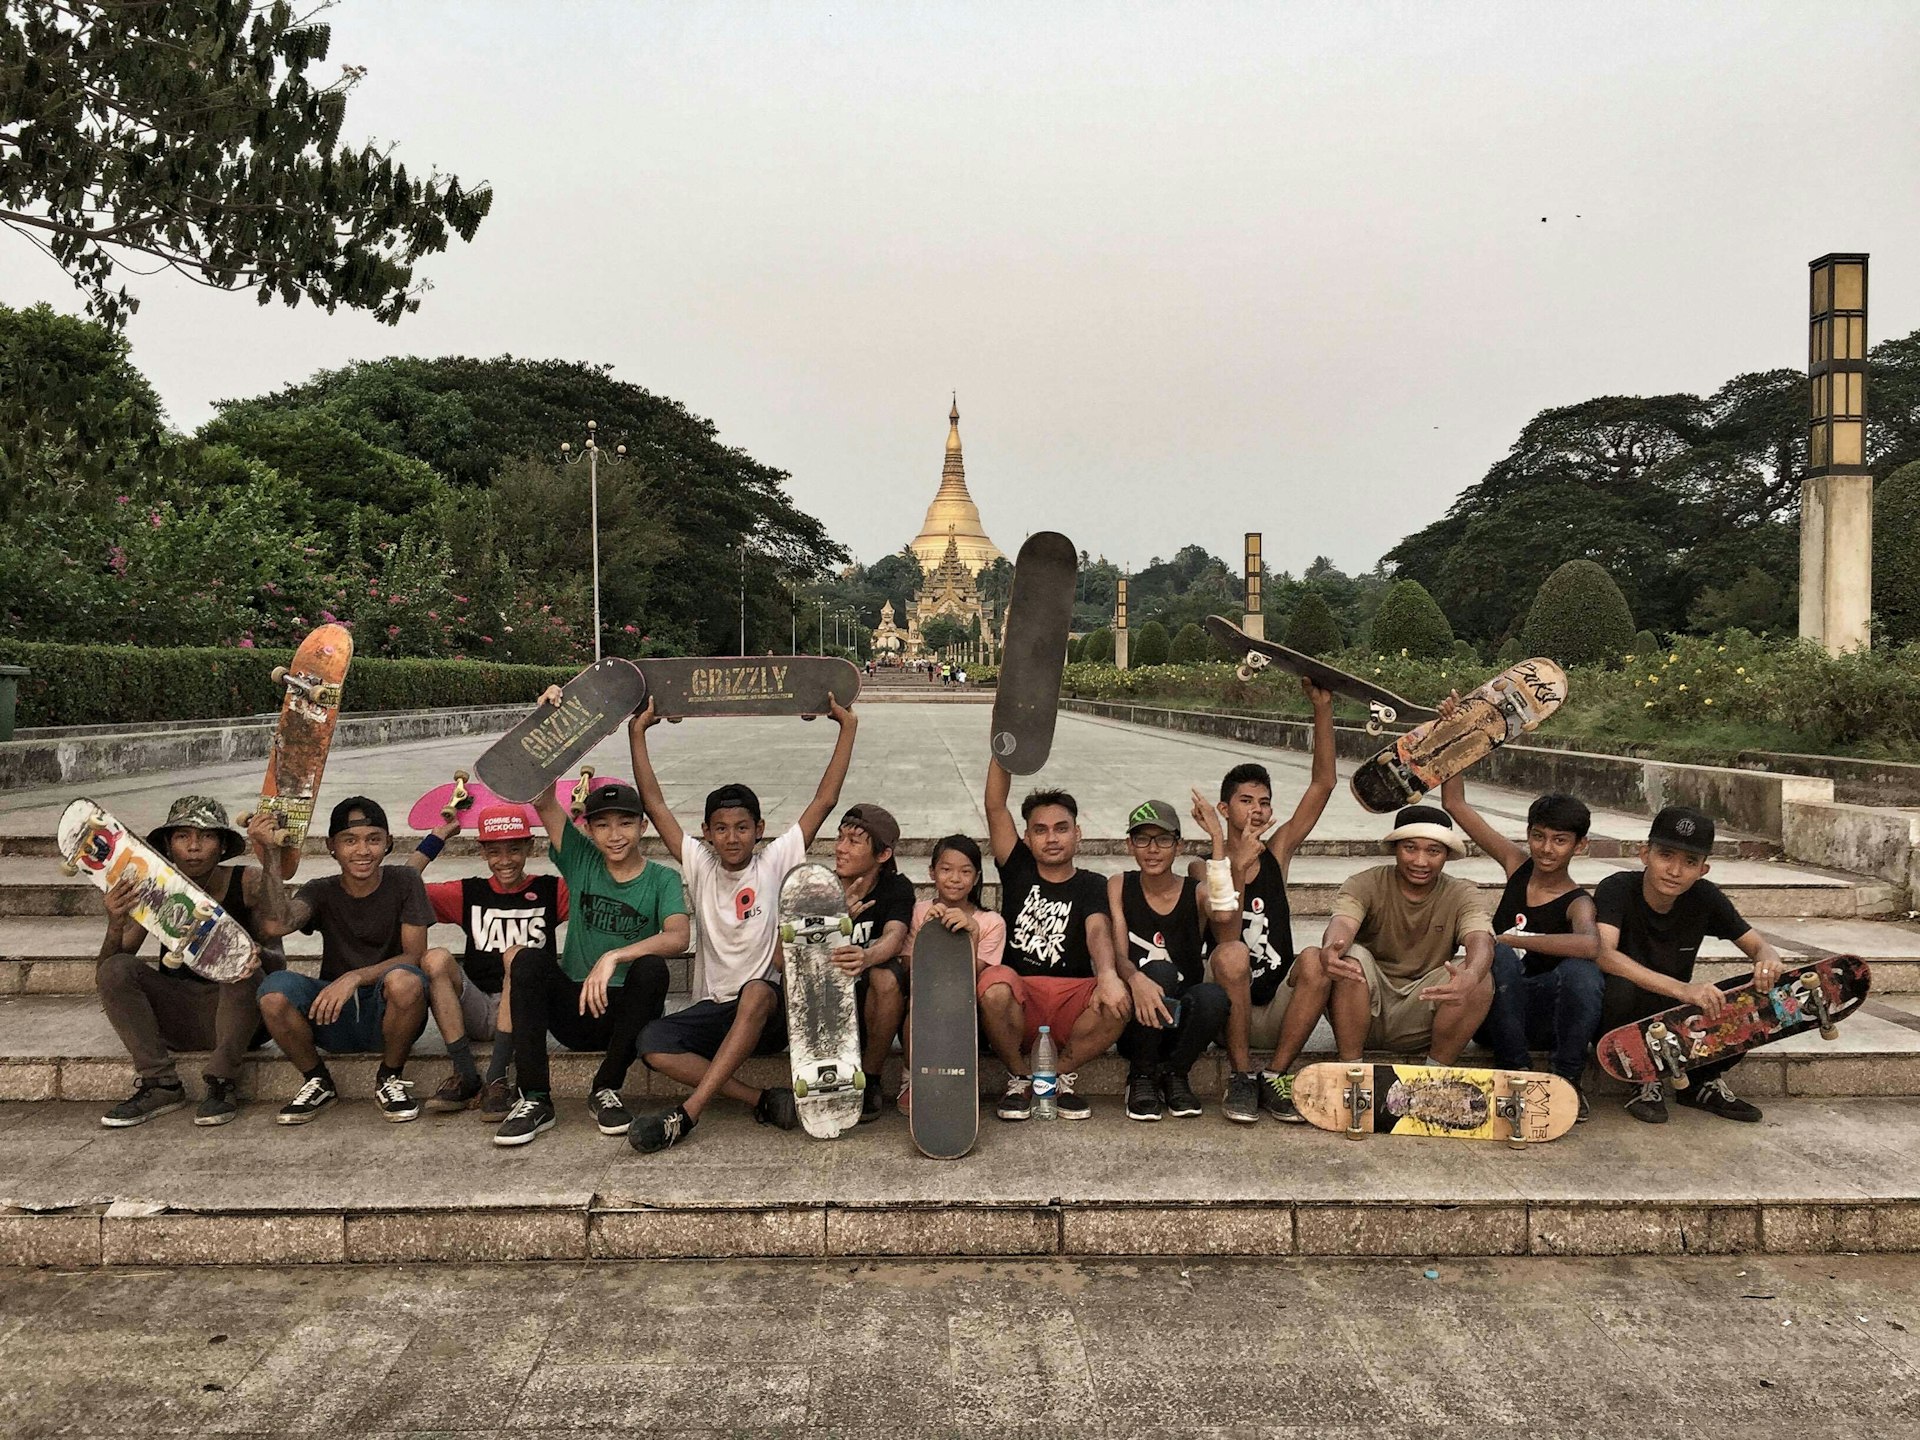 For the skaters of Myanmar, boards are a symbol of hope